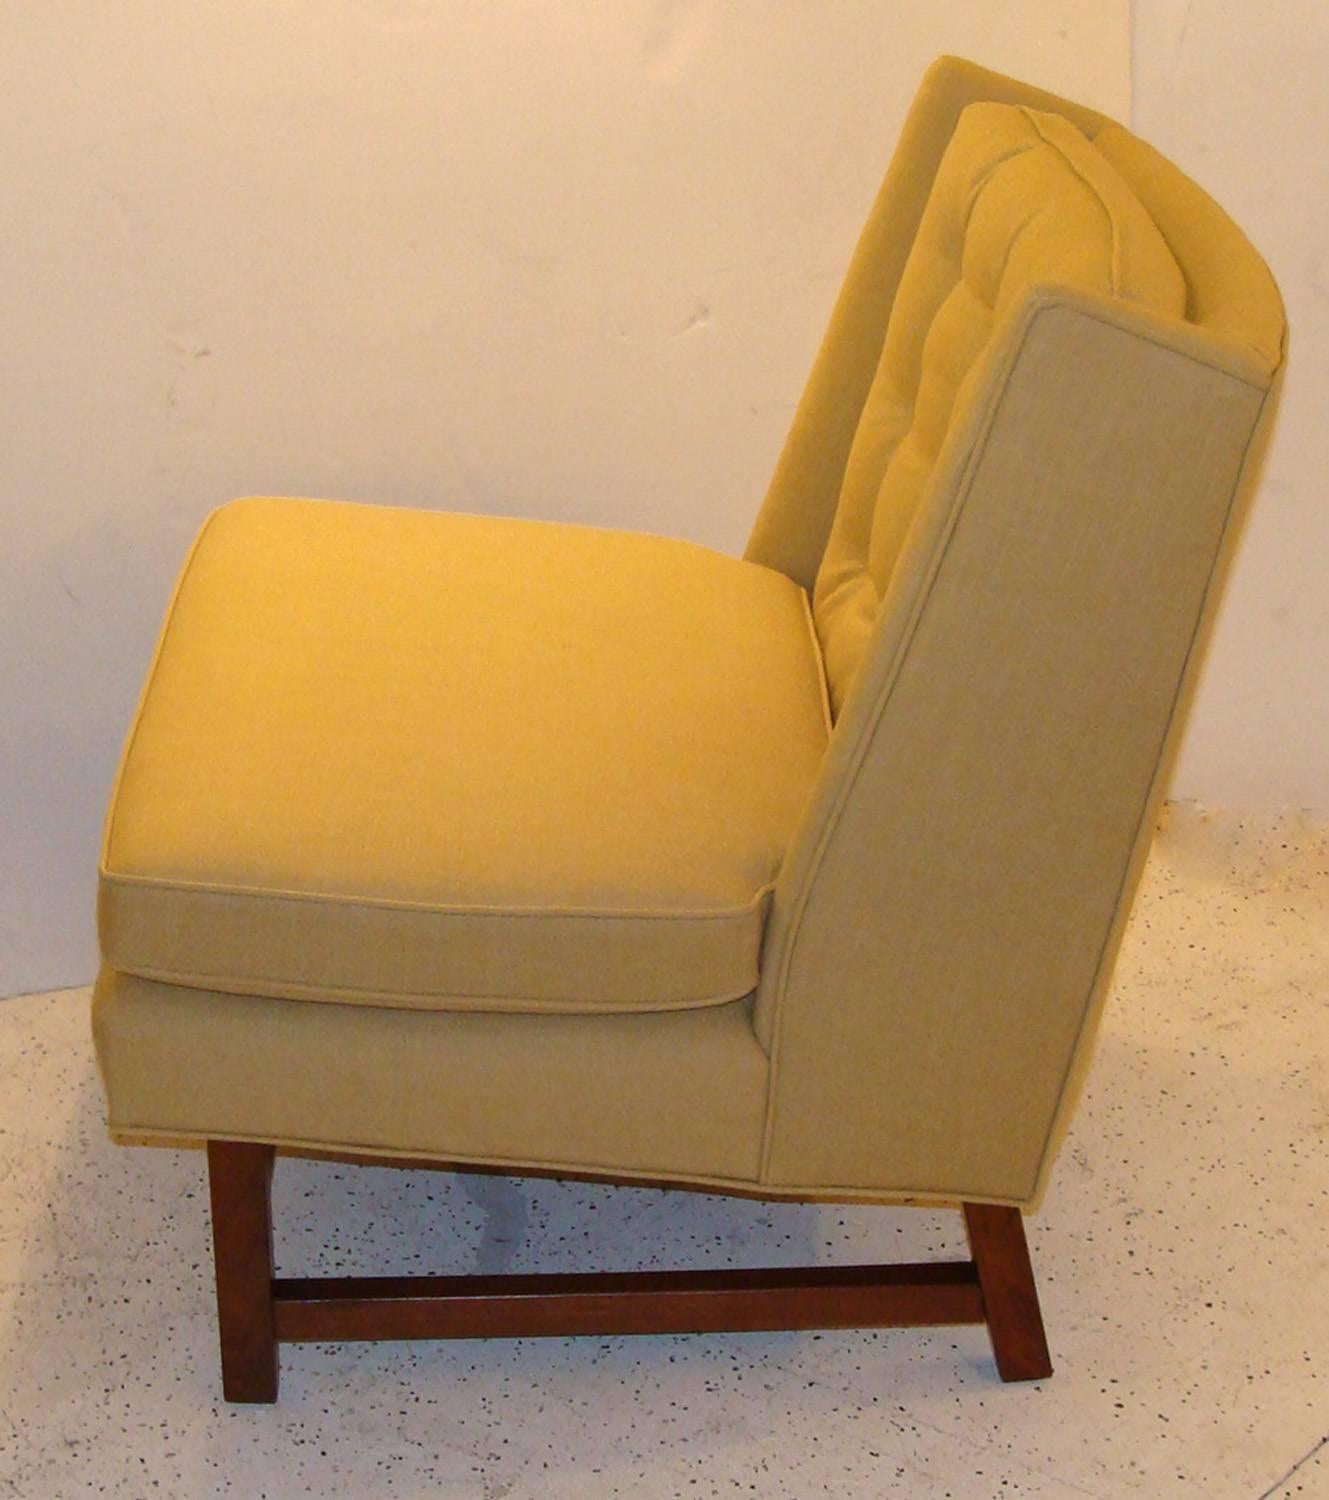 20th Century Pair of Edward Wormley Style Mid-Century Chairs